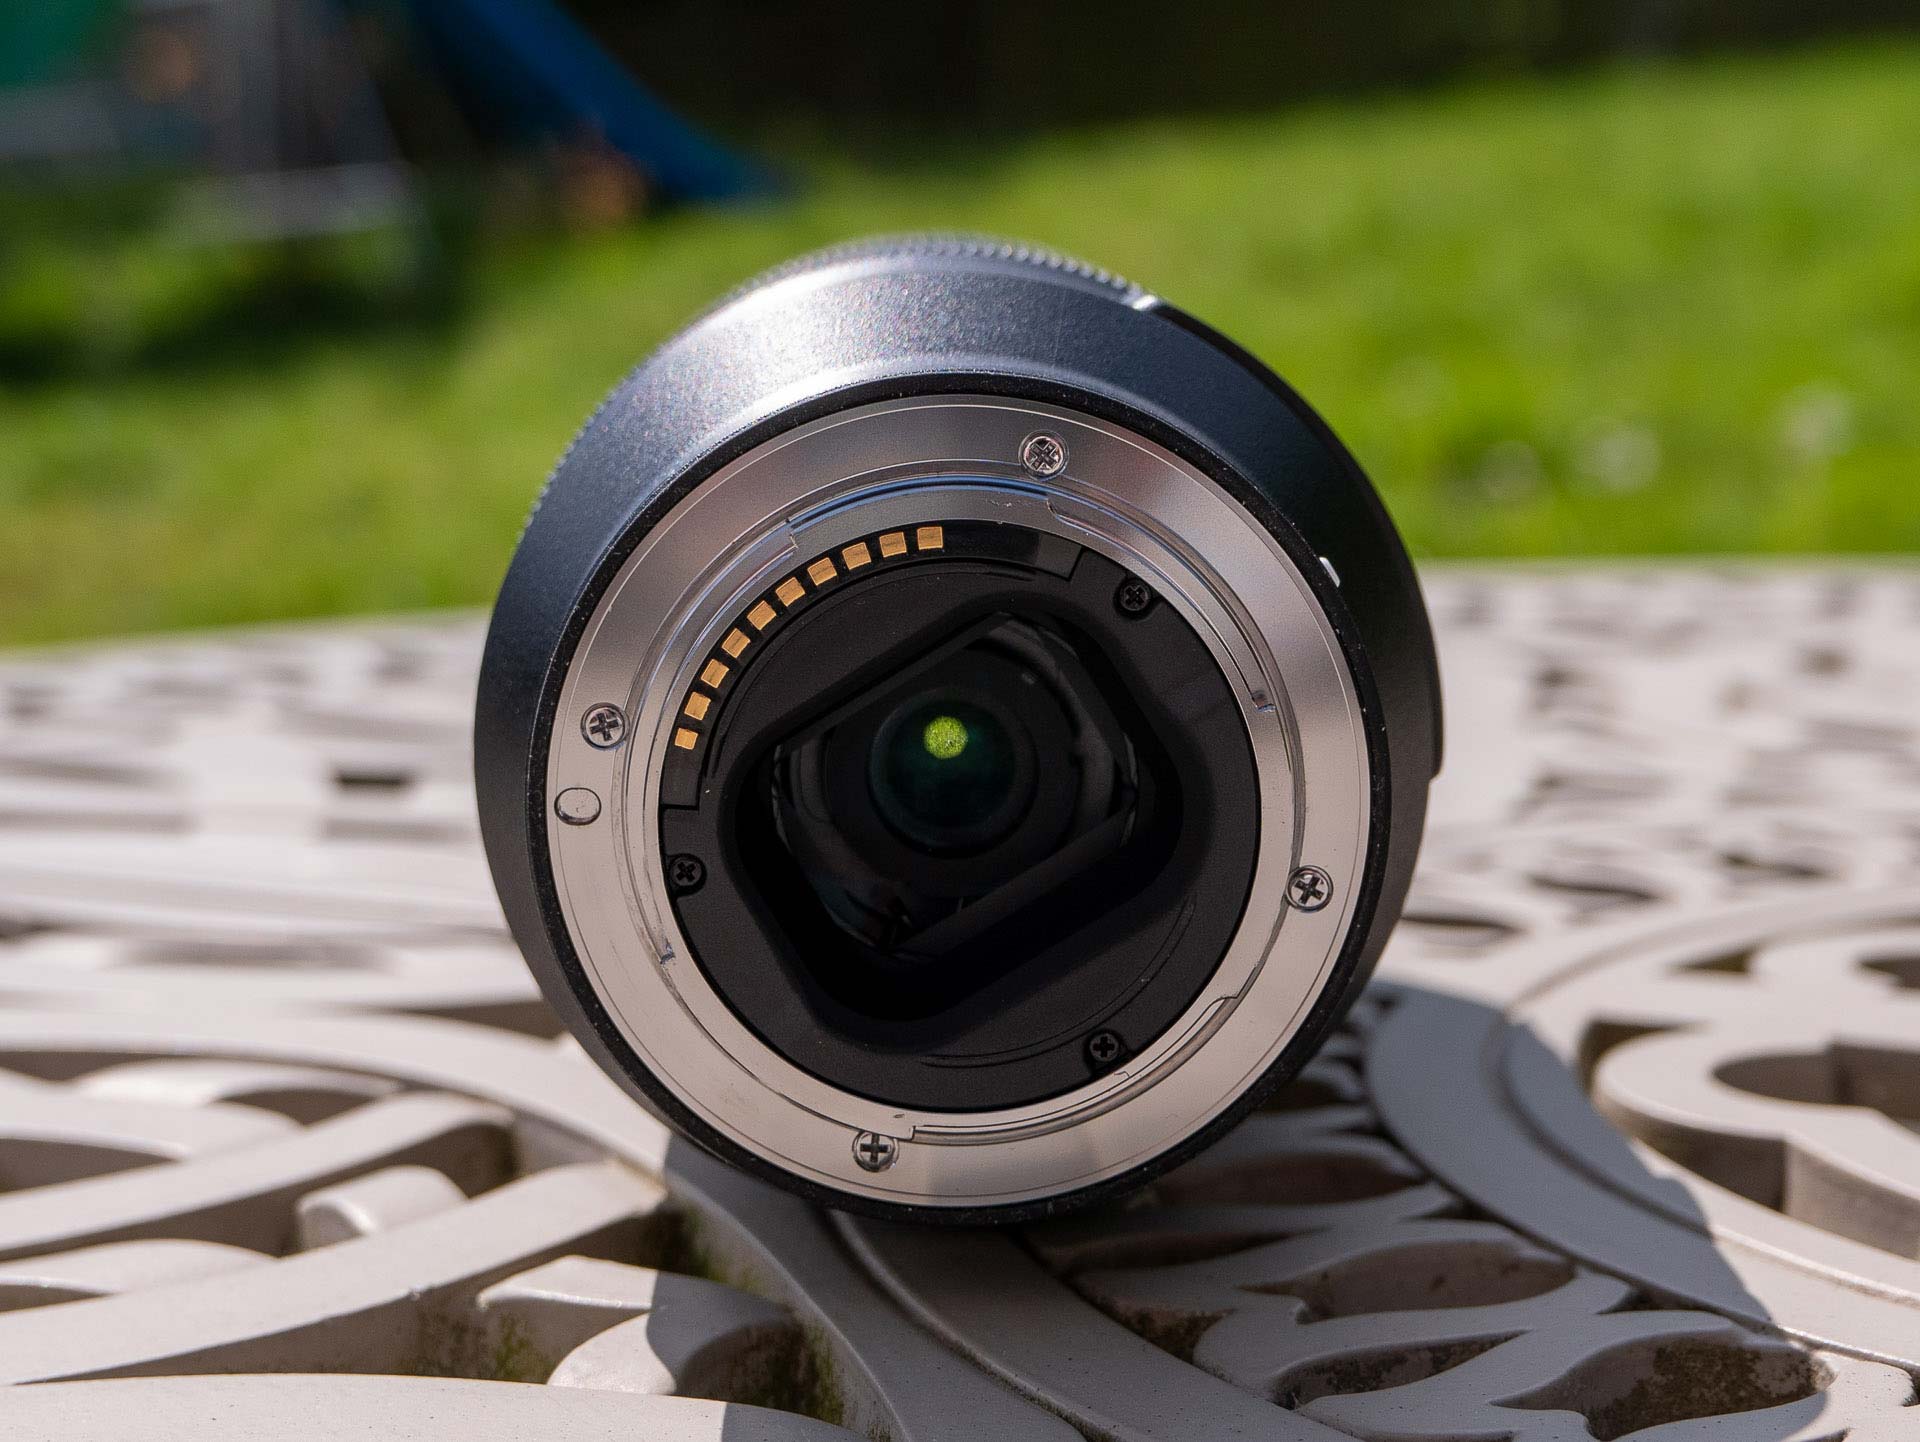 Sony E 70-350mm F4.5-6.3 G OSS Review | Photography Blog